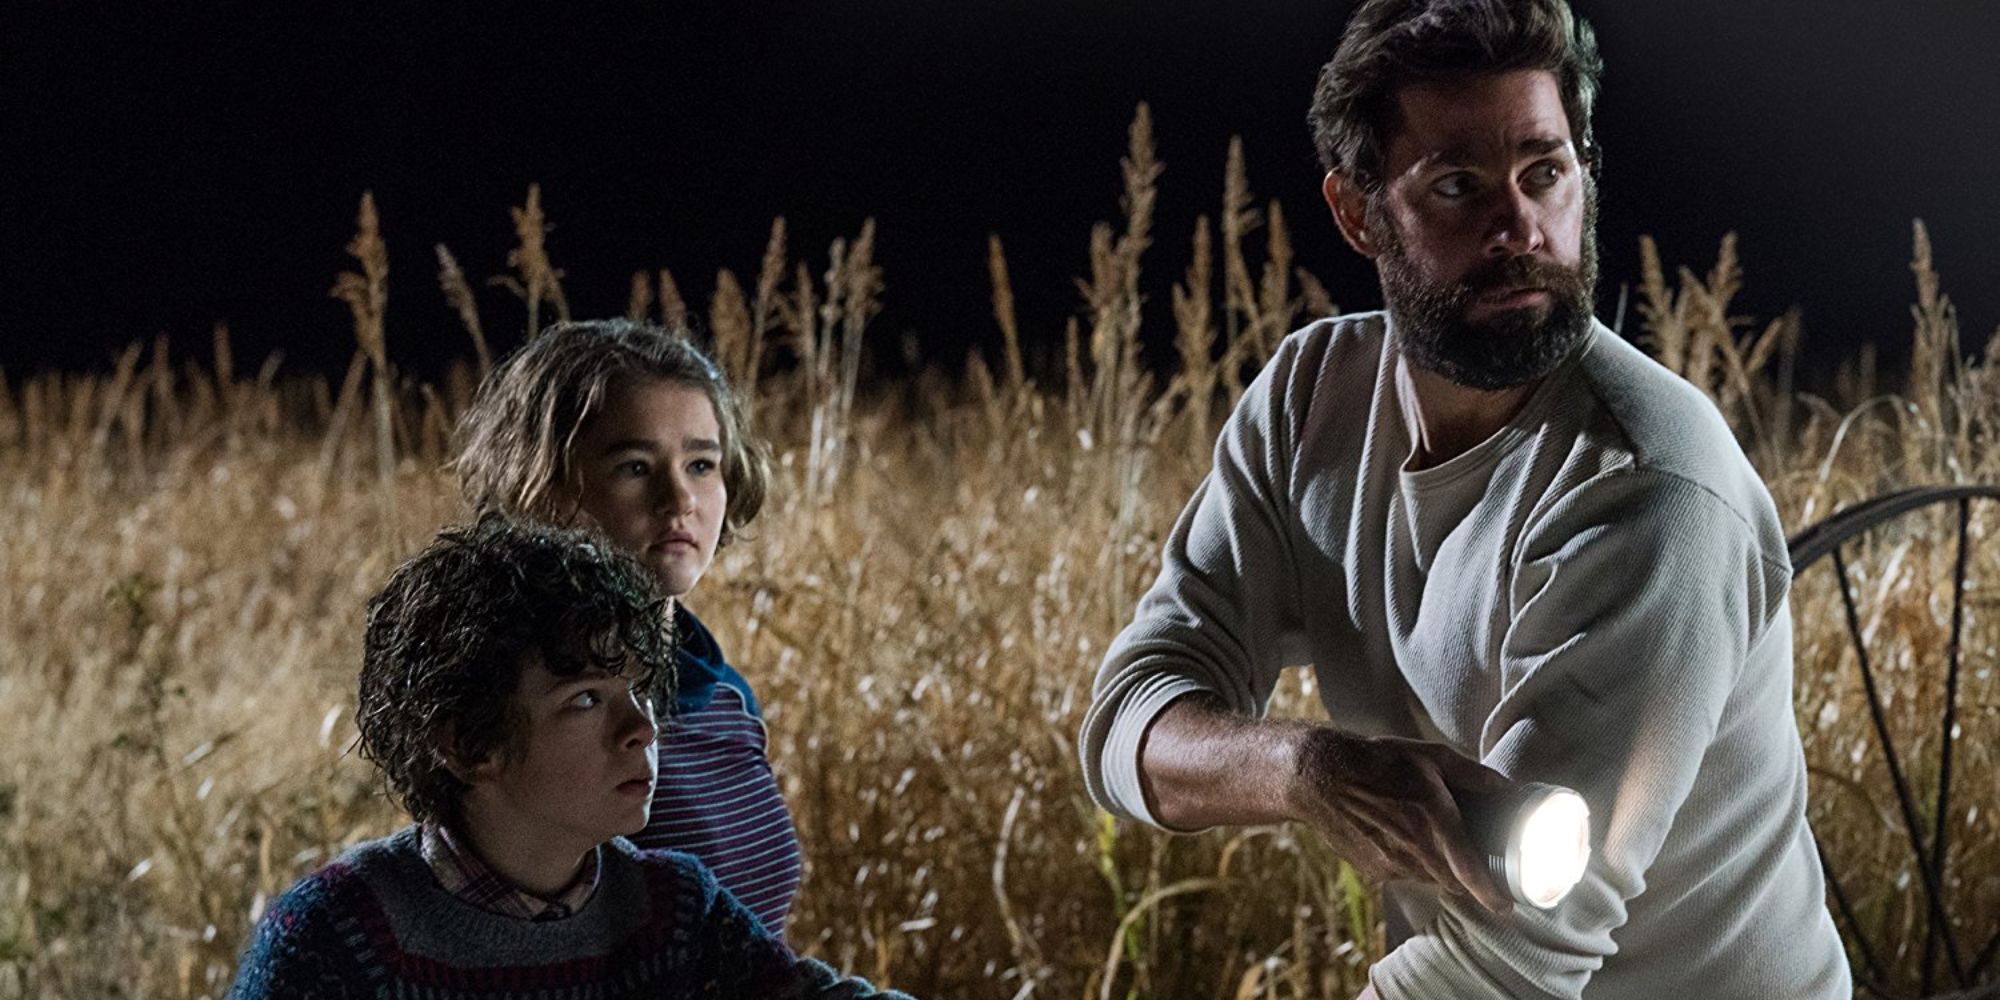 A father leads his two children through a field at night while trying not to make any noise. 